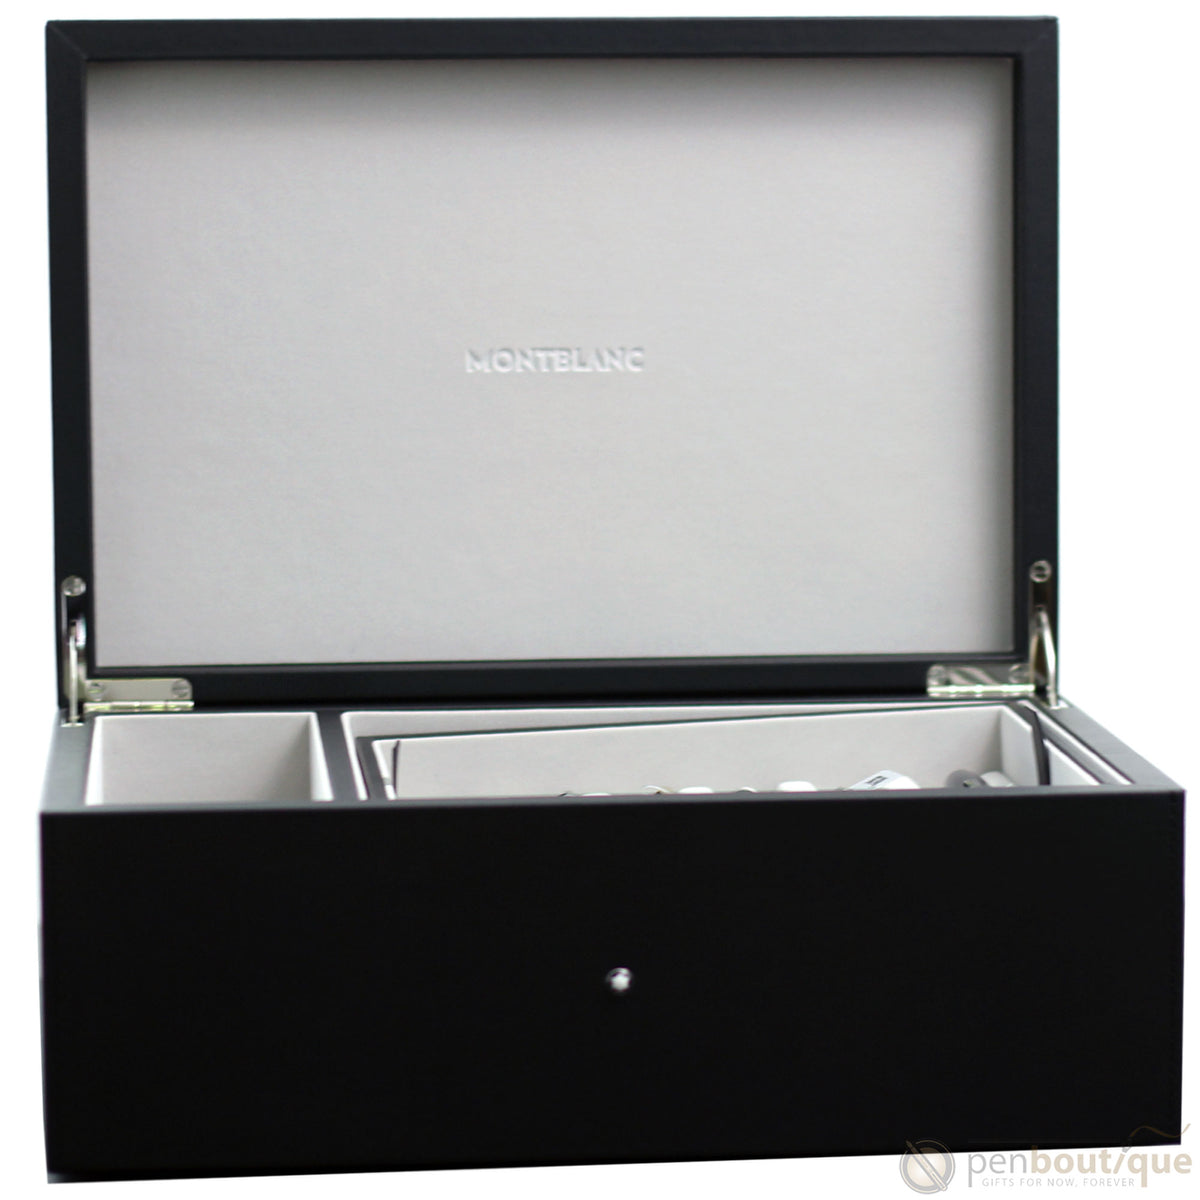 Get huge savings on Montblanc Collector Box - Leather (Holds 12